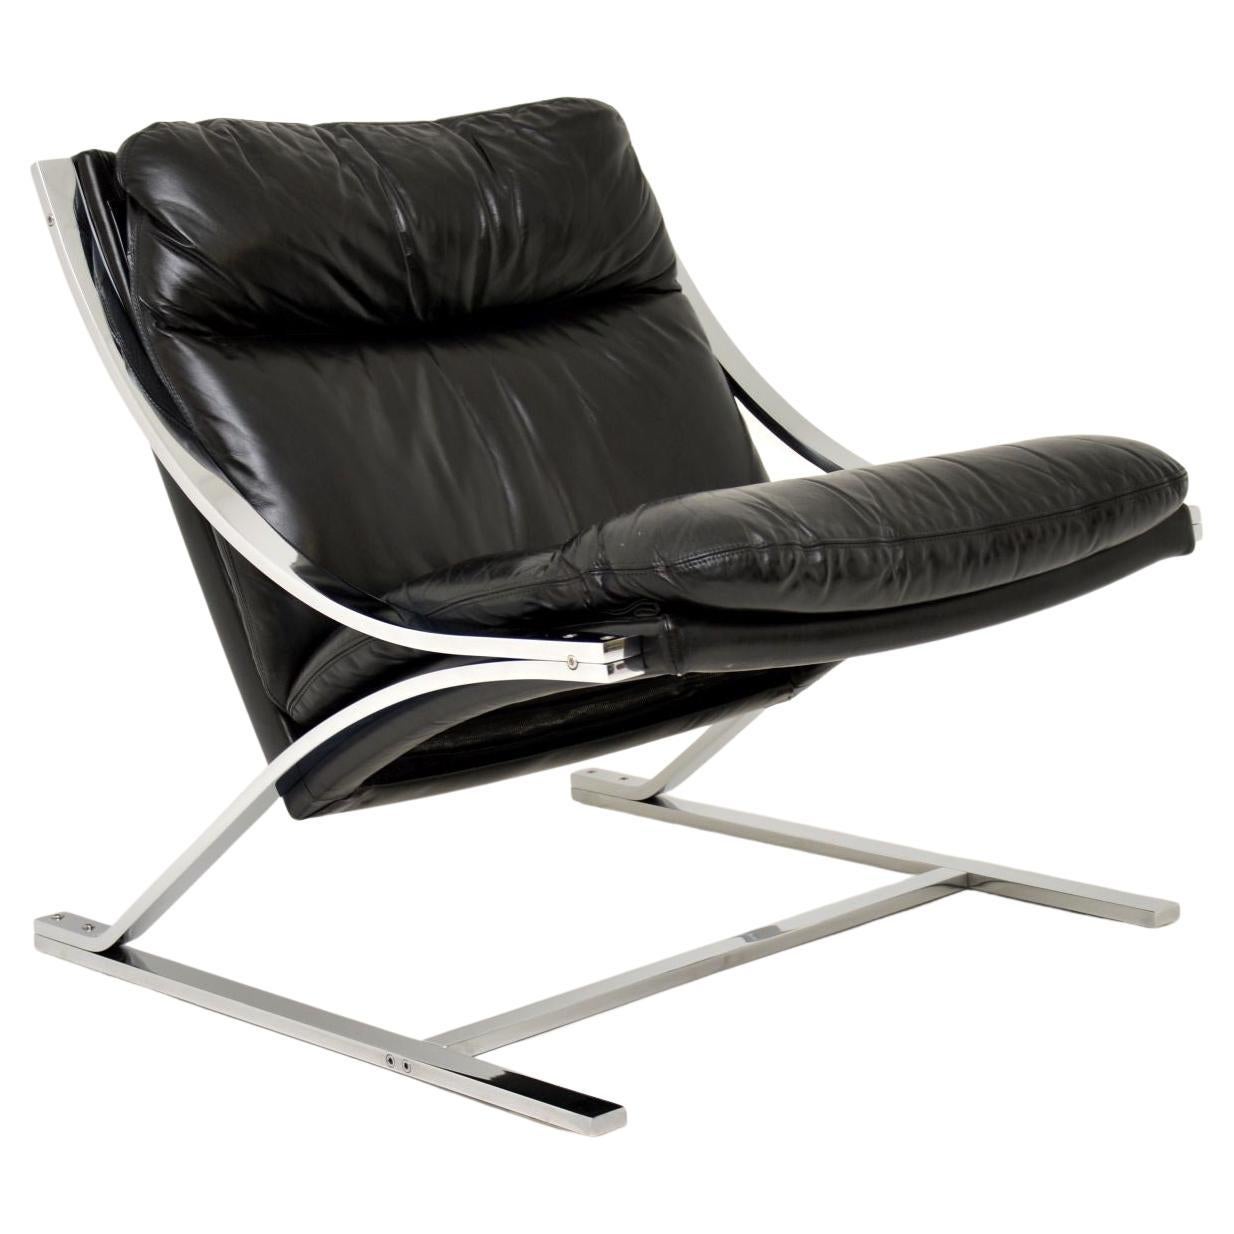 1960's Vintage Leather & Chrome Zeta Chair by Paul Tuttle for Strassle